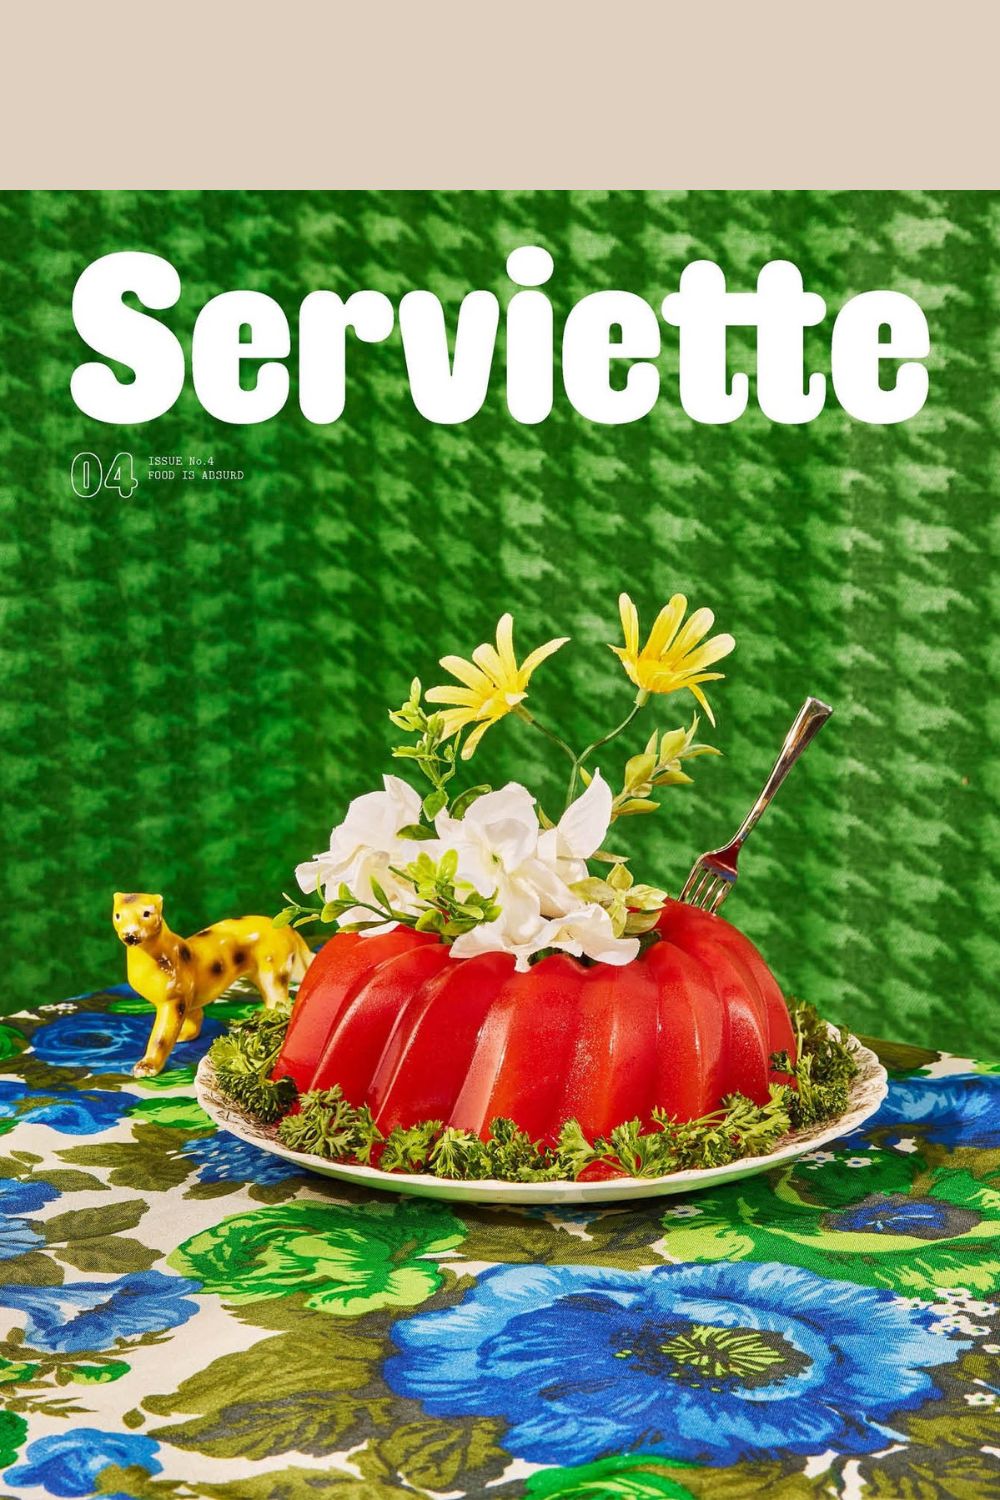 Serviette Magazine cover Issue 4 (red jello with parsley against green tweed background)